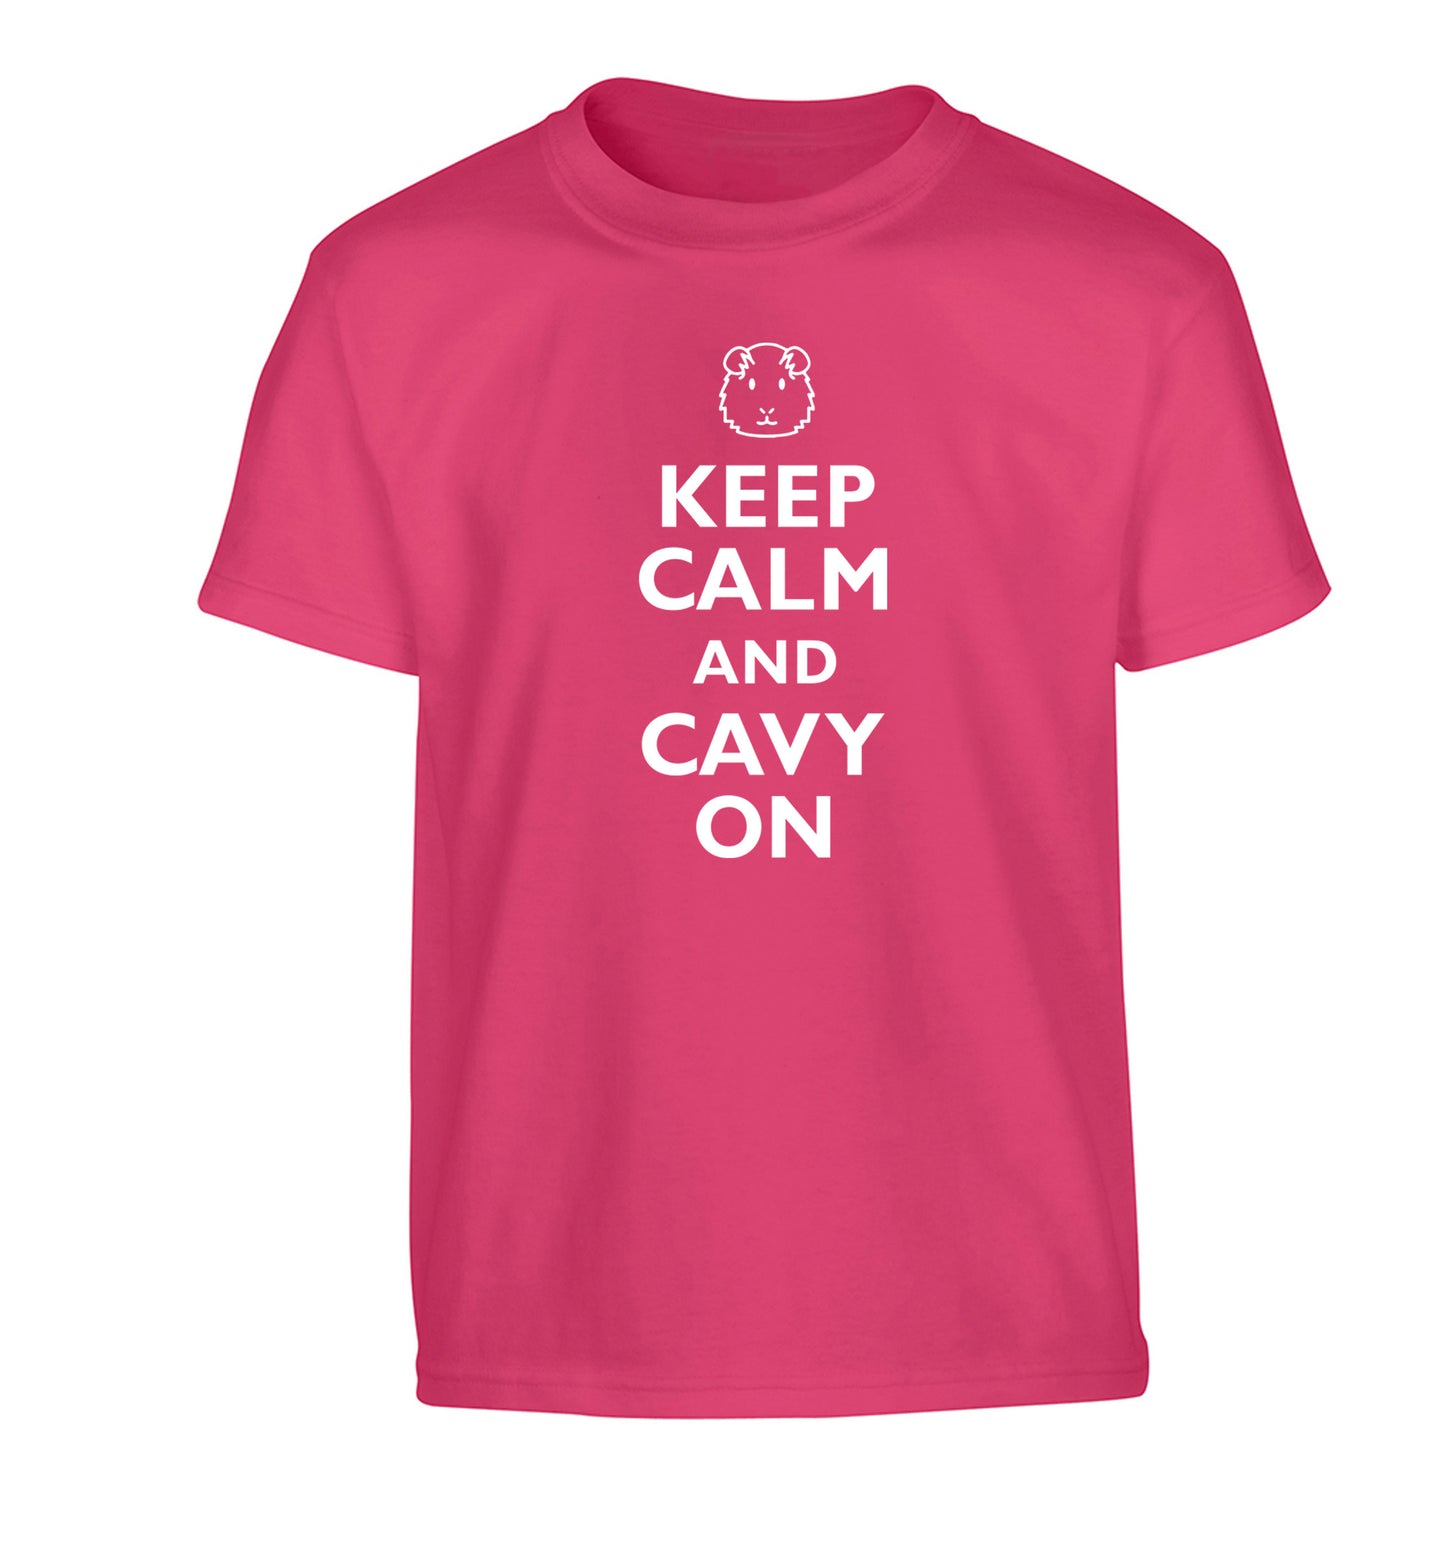 Keep calm and cavvy on Children's pink Tshirt 12-14 Years